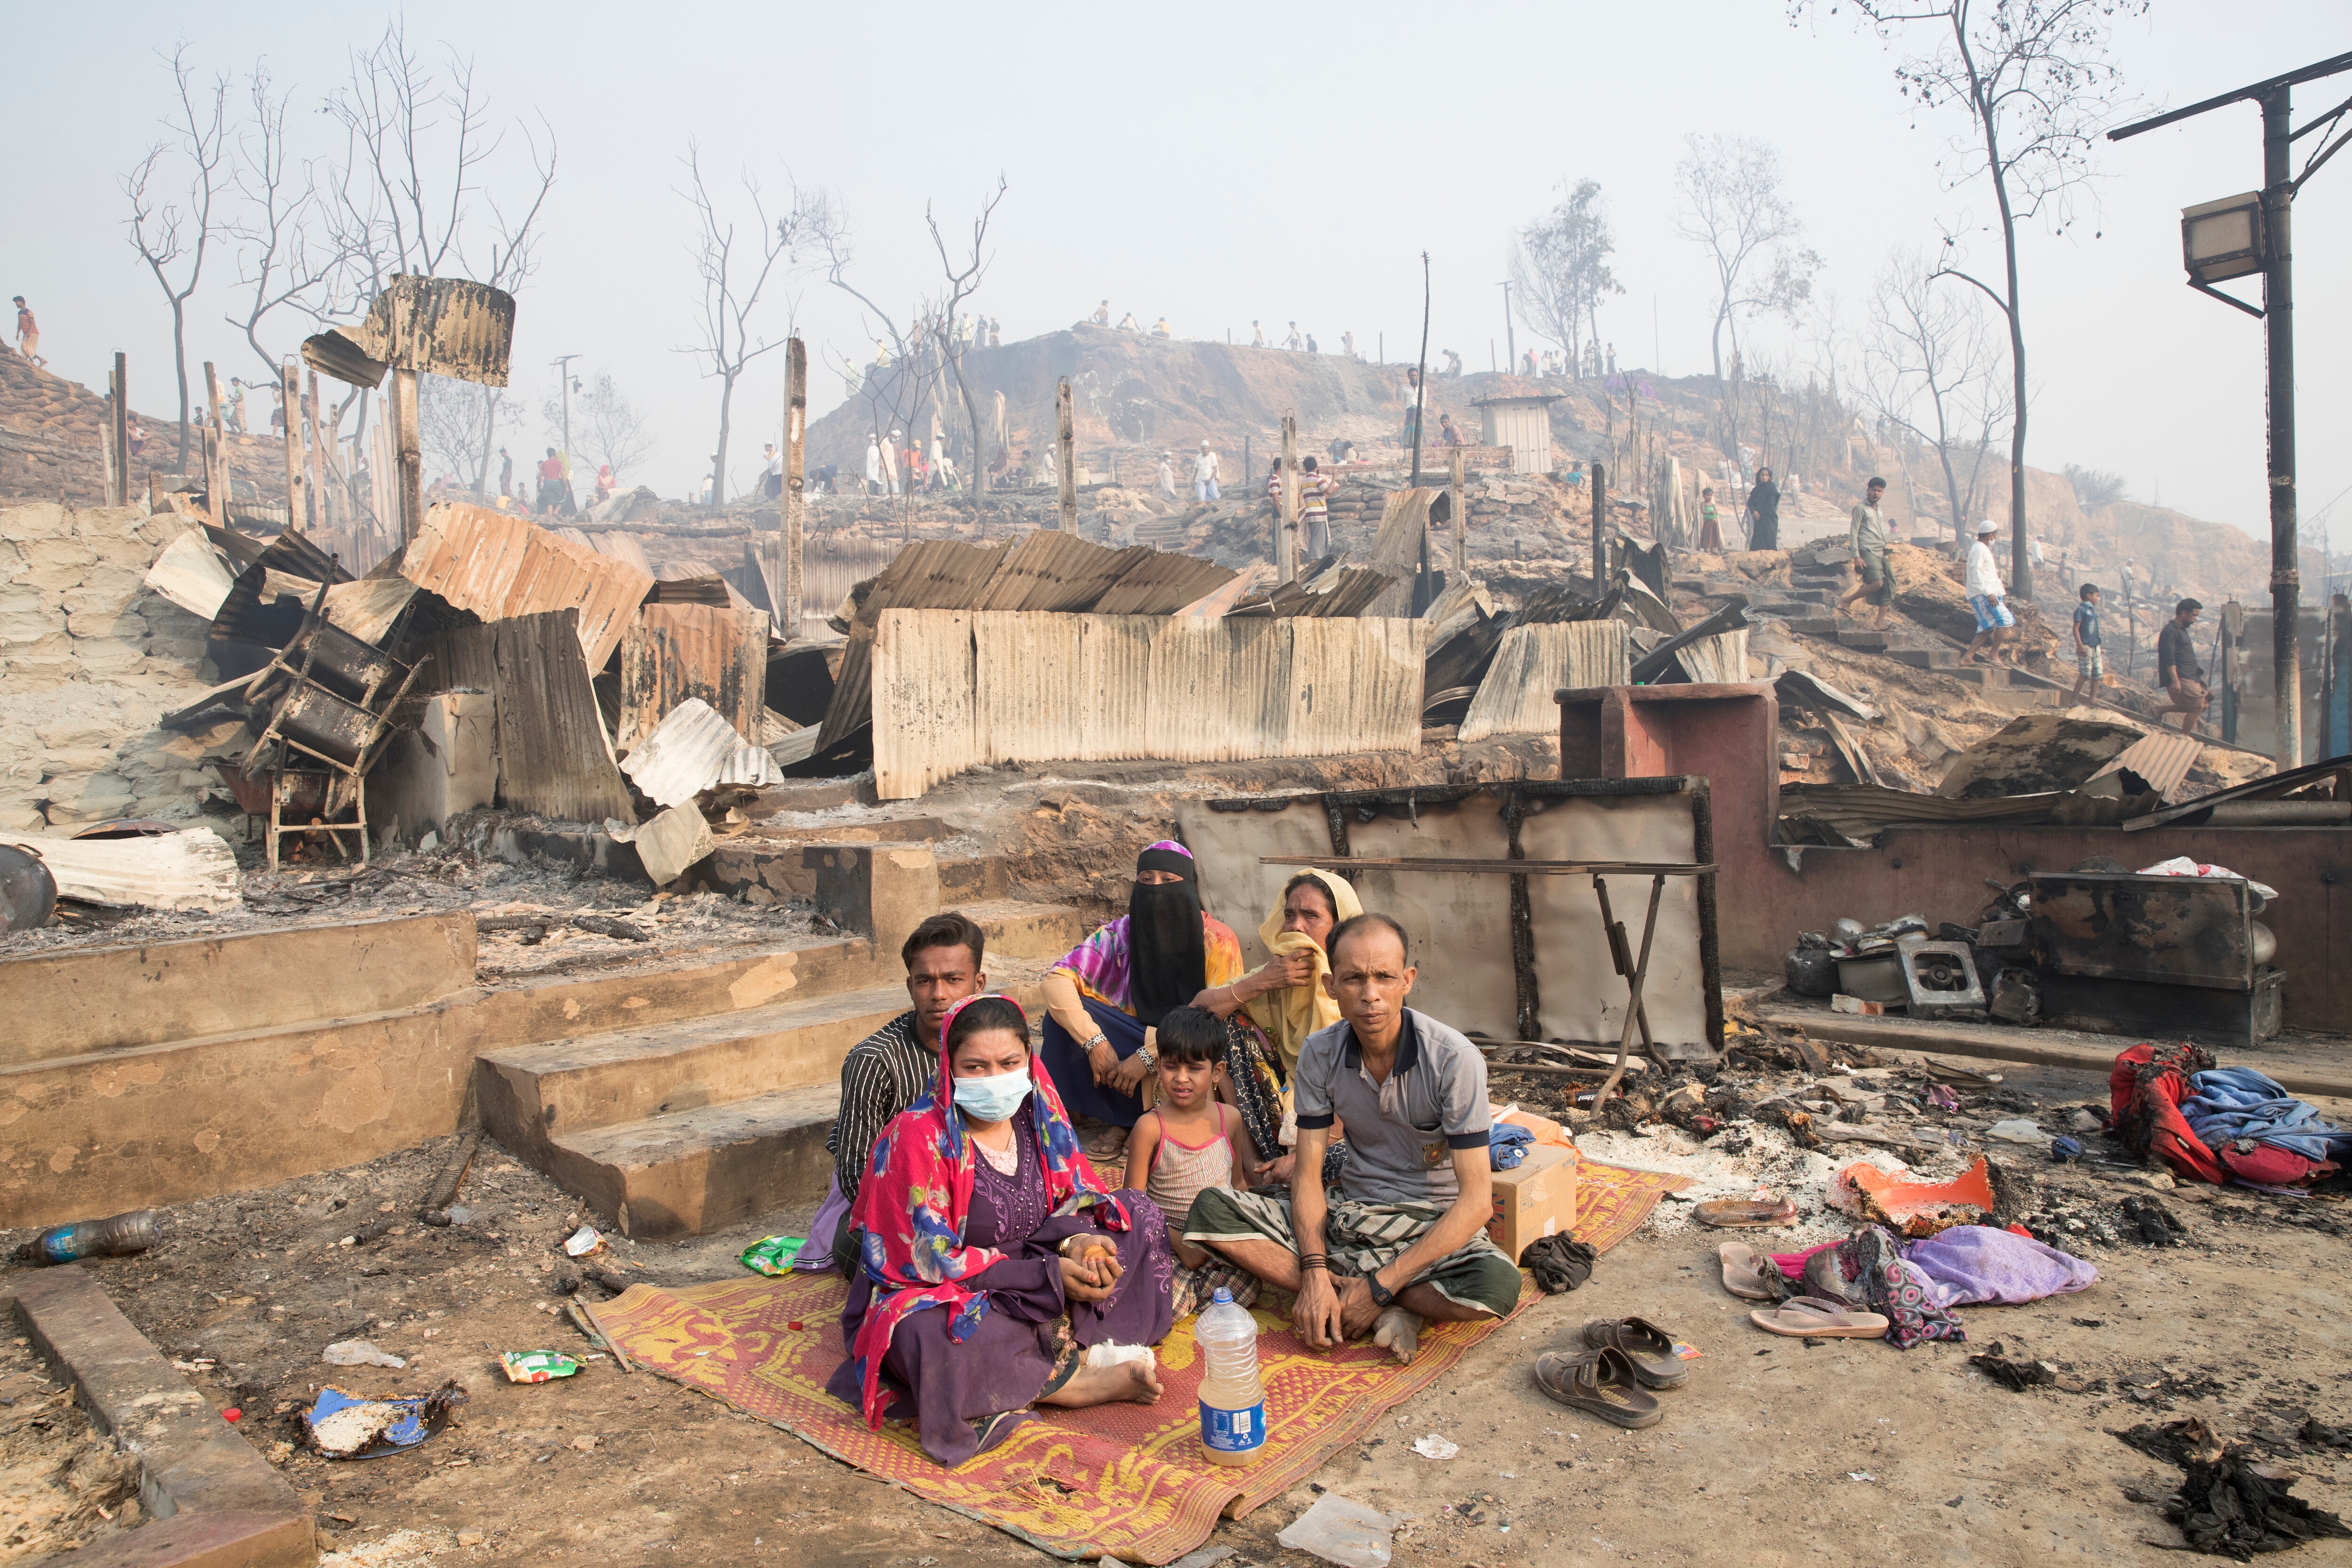 A Rohingya family sits under an open sky after a huge fire swept through a Rohingya refugee camp in southern Bangladesh on Monday.